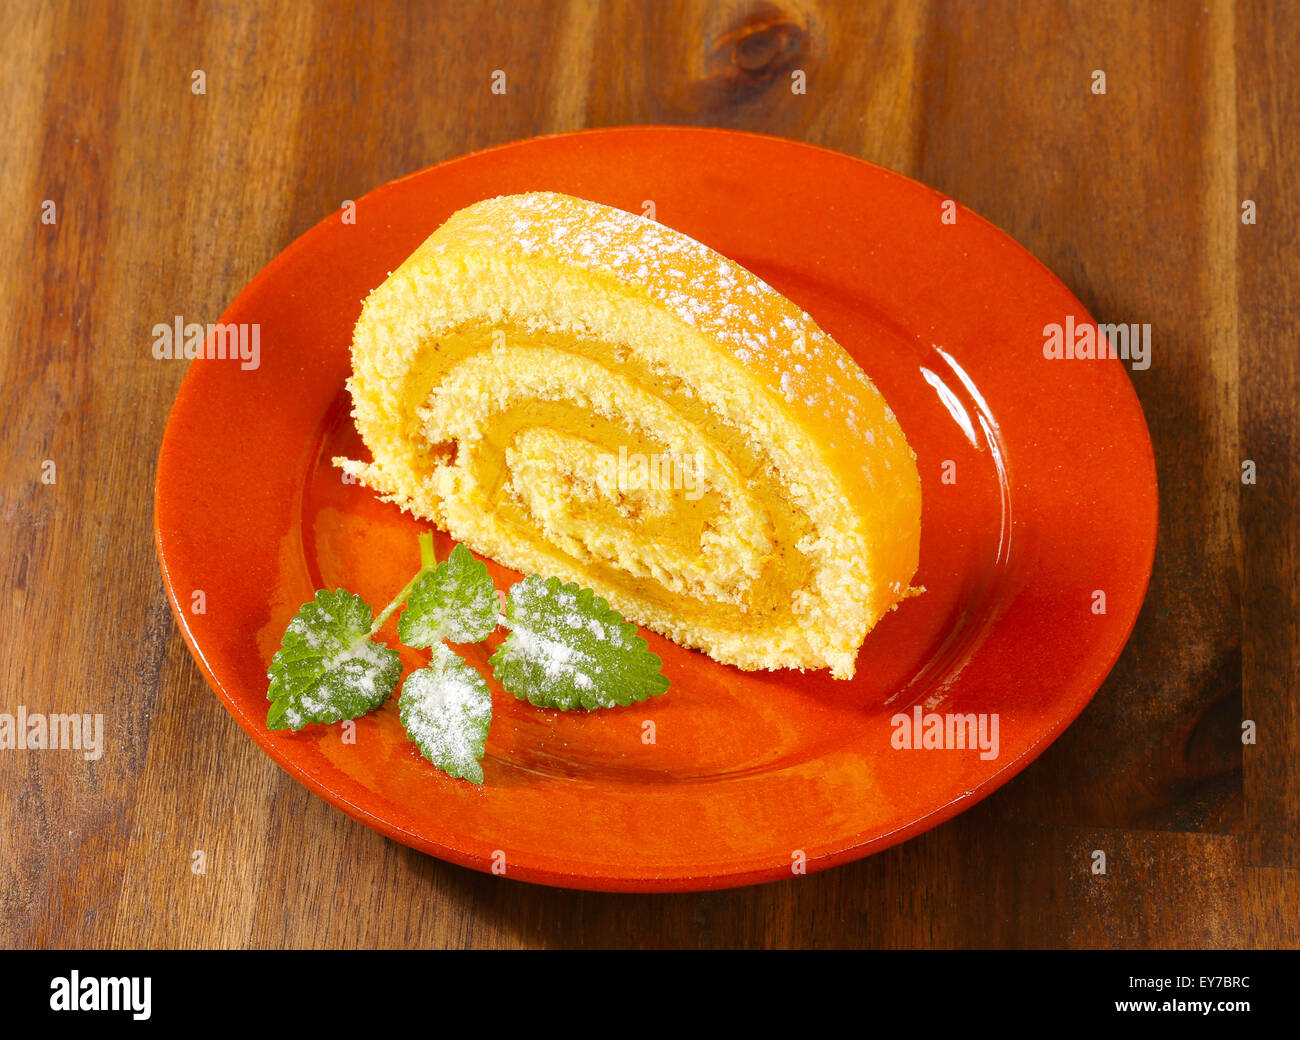 Swiss roll with peanut butter cream filling Stock Photo